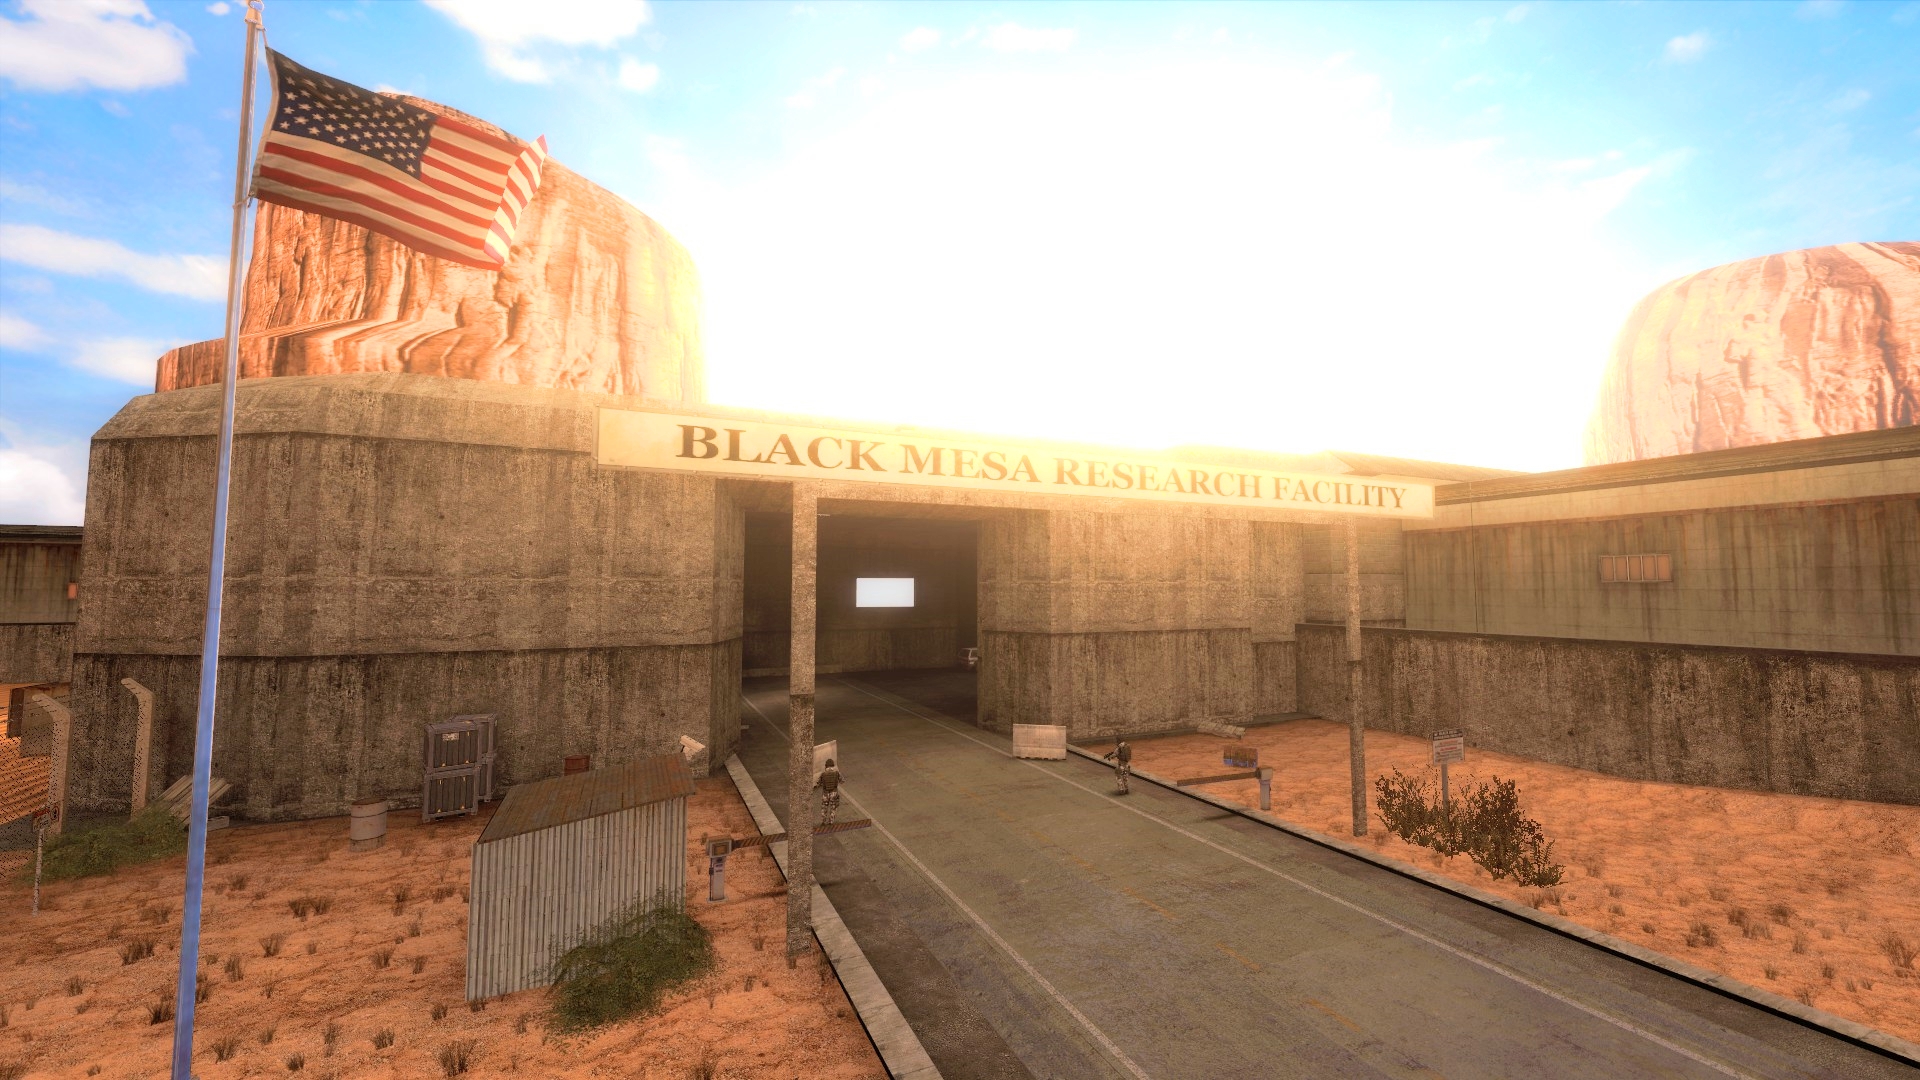 the black mesa research facility website